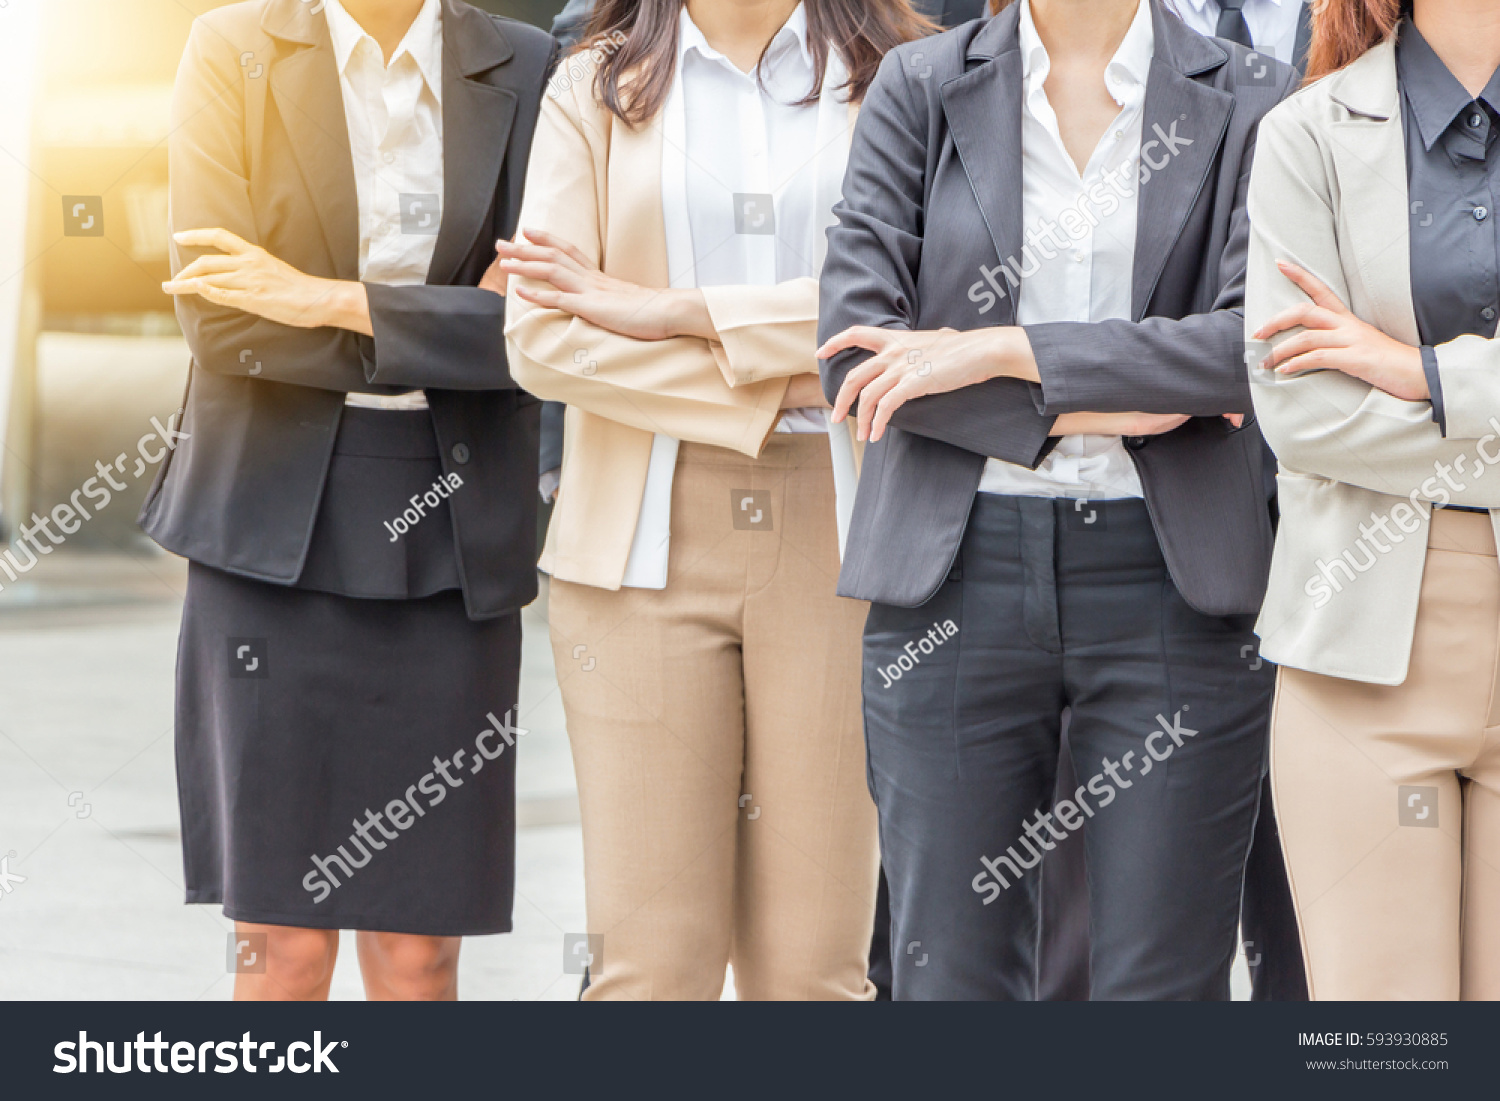 Success Teamwork Concept, Business people standing with arms crossed city background. #593930885